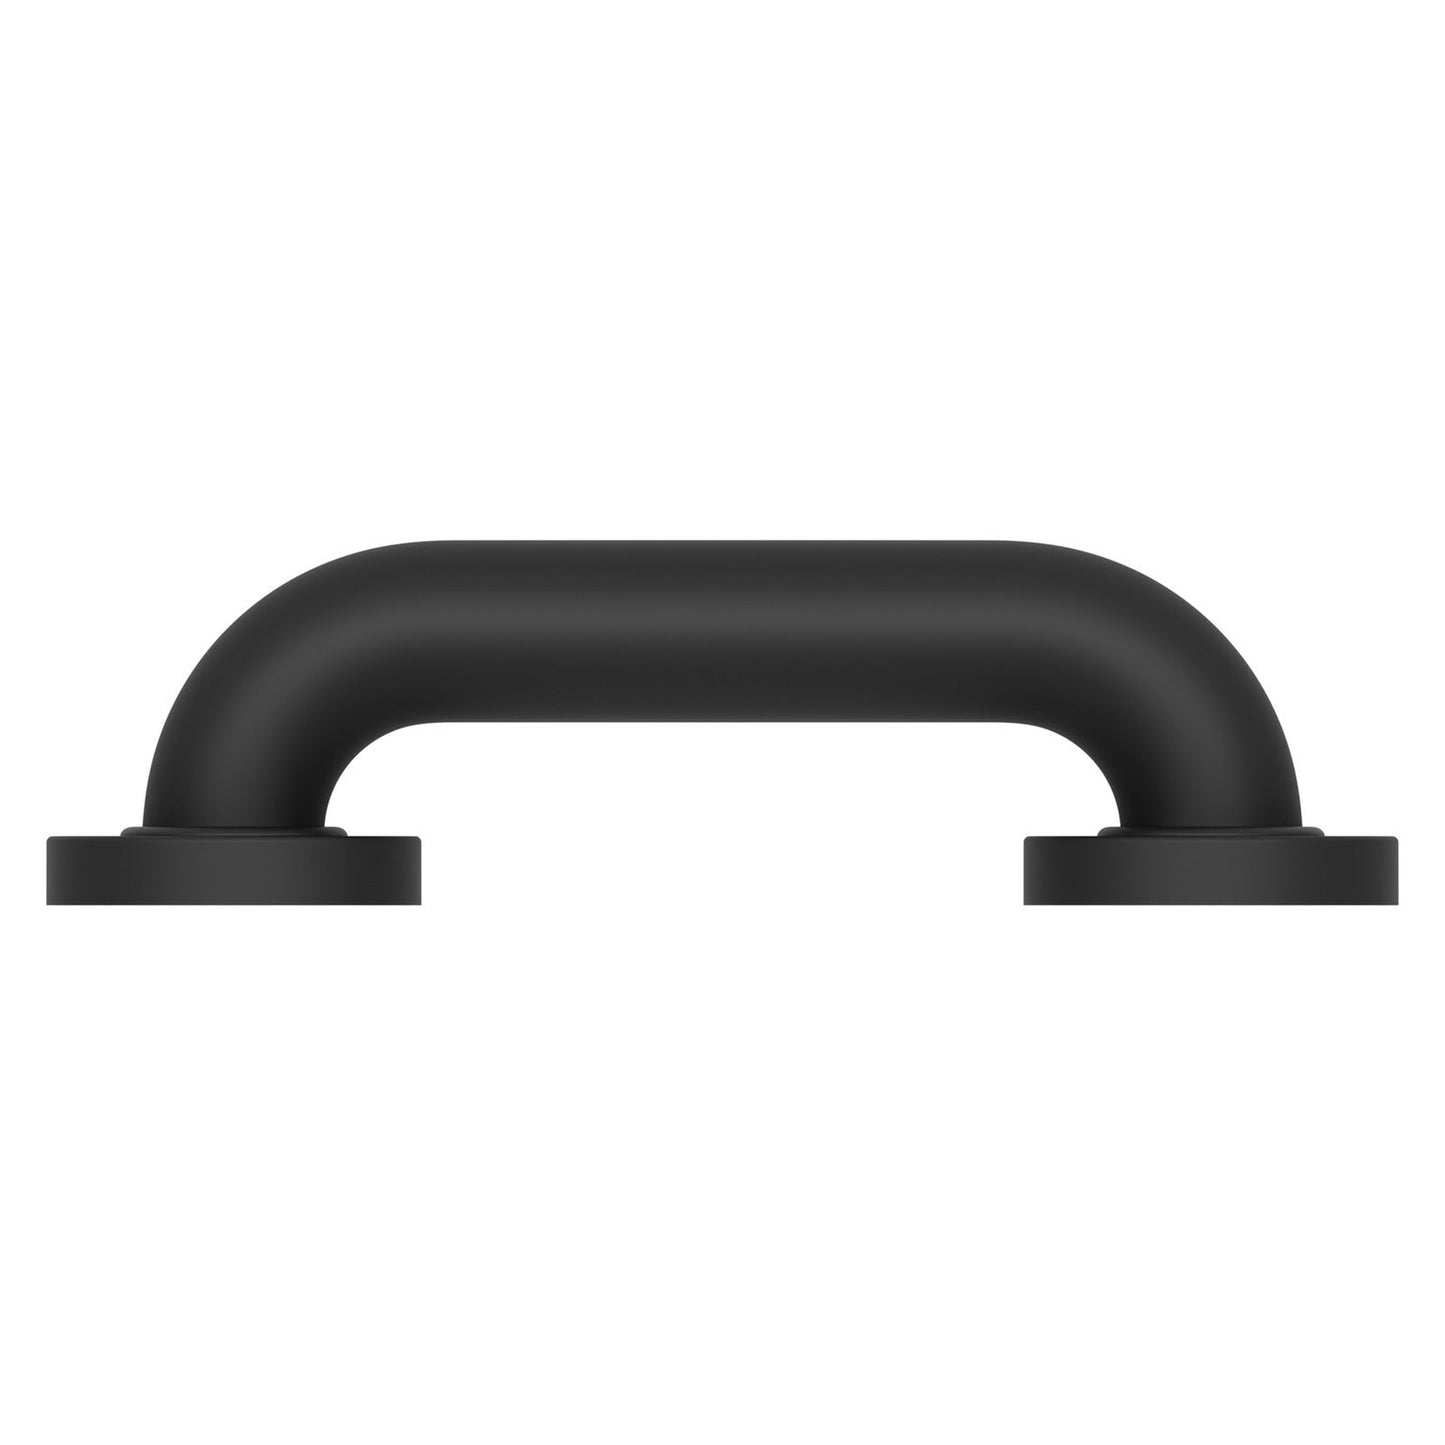 Evekare 8" x 1.5" Stainless Steel Concealed Mount Grab Bar With Comfort Grip Coating in Matte Black